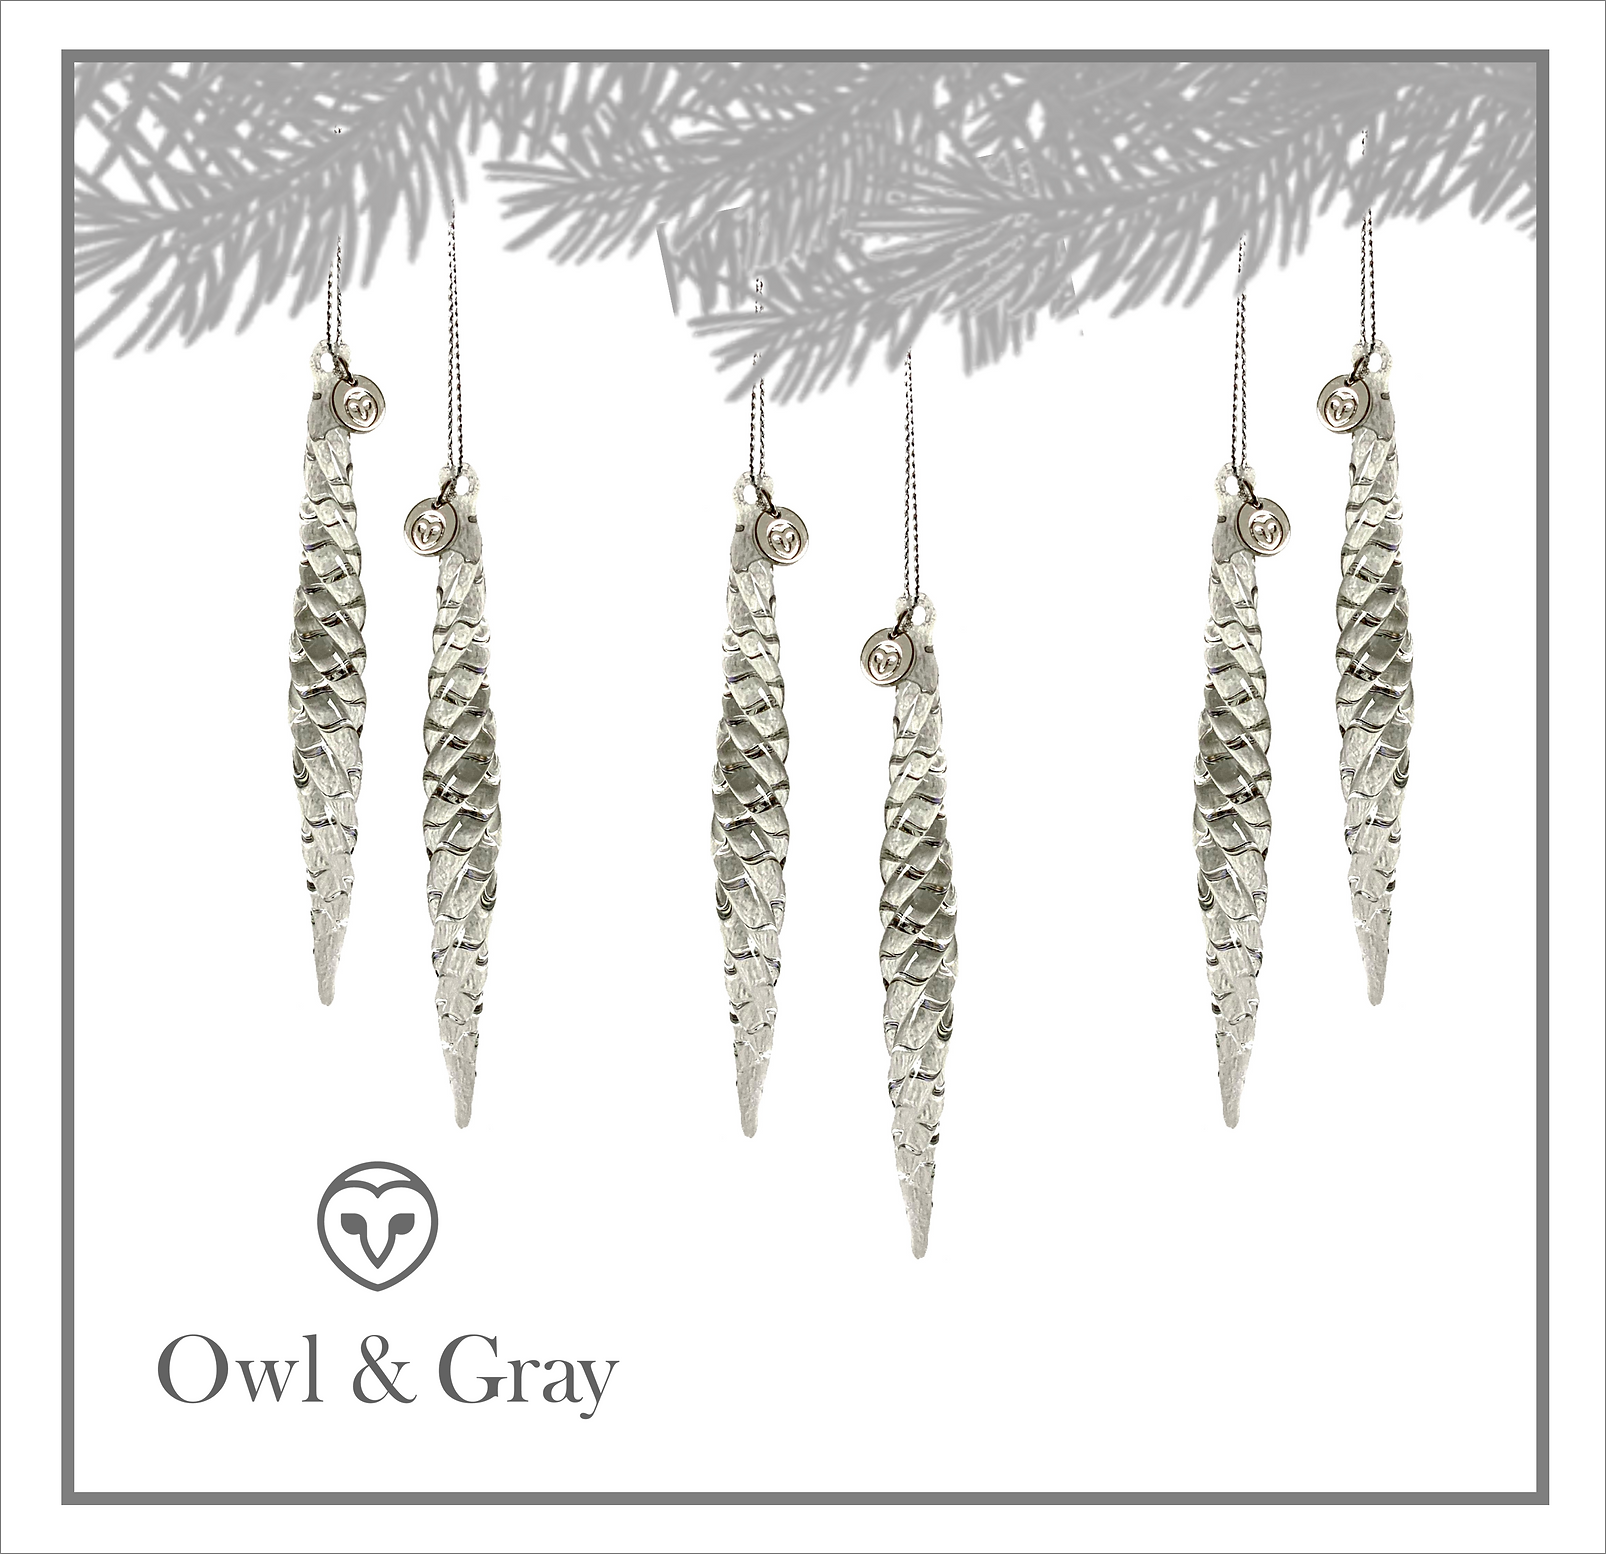 Owl & Gray - Twisted Glass Icicle Ornaments